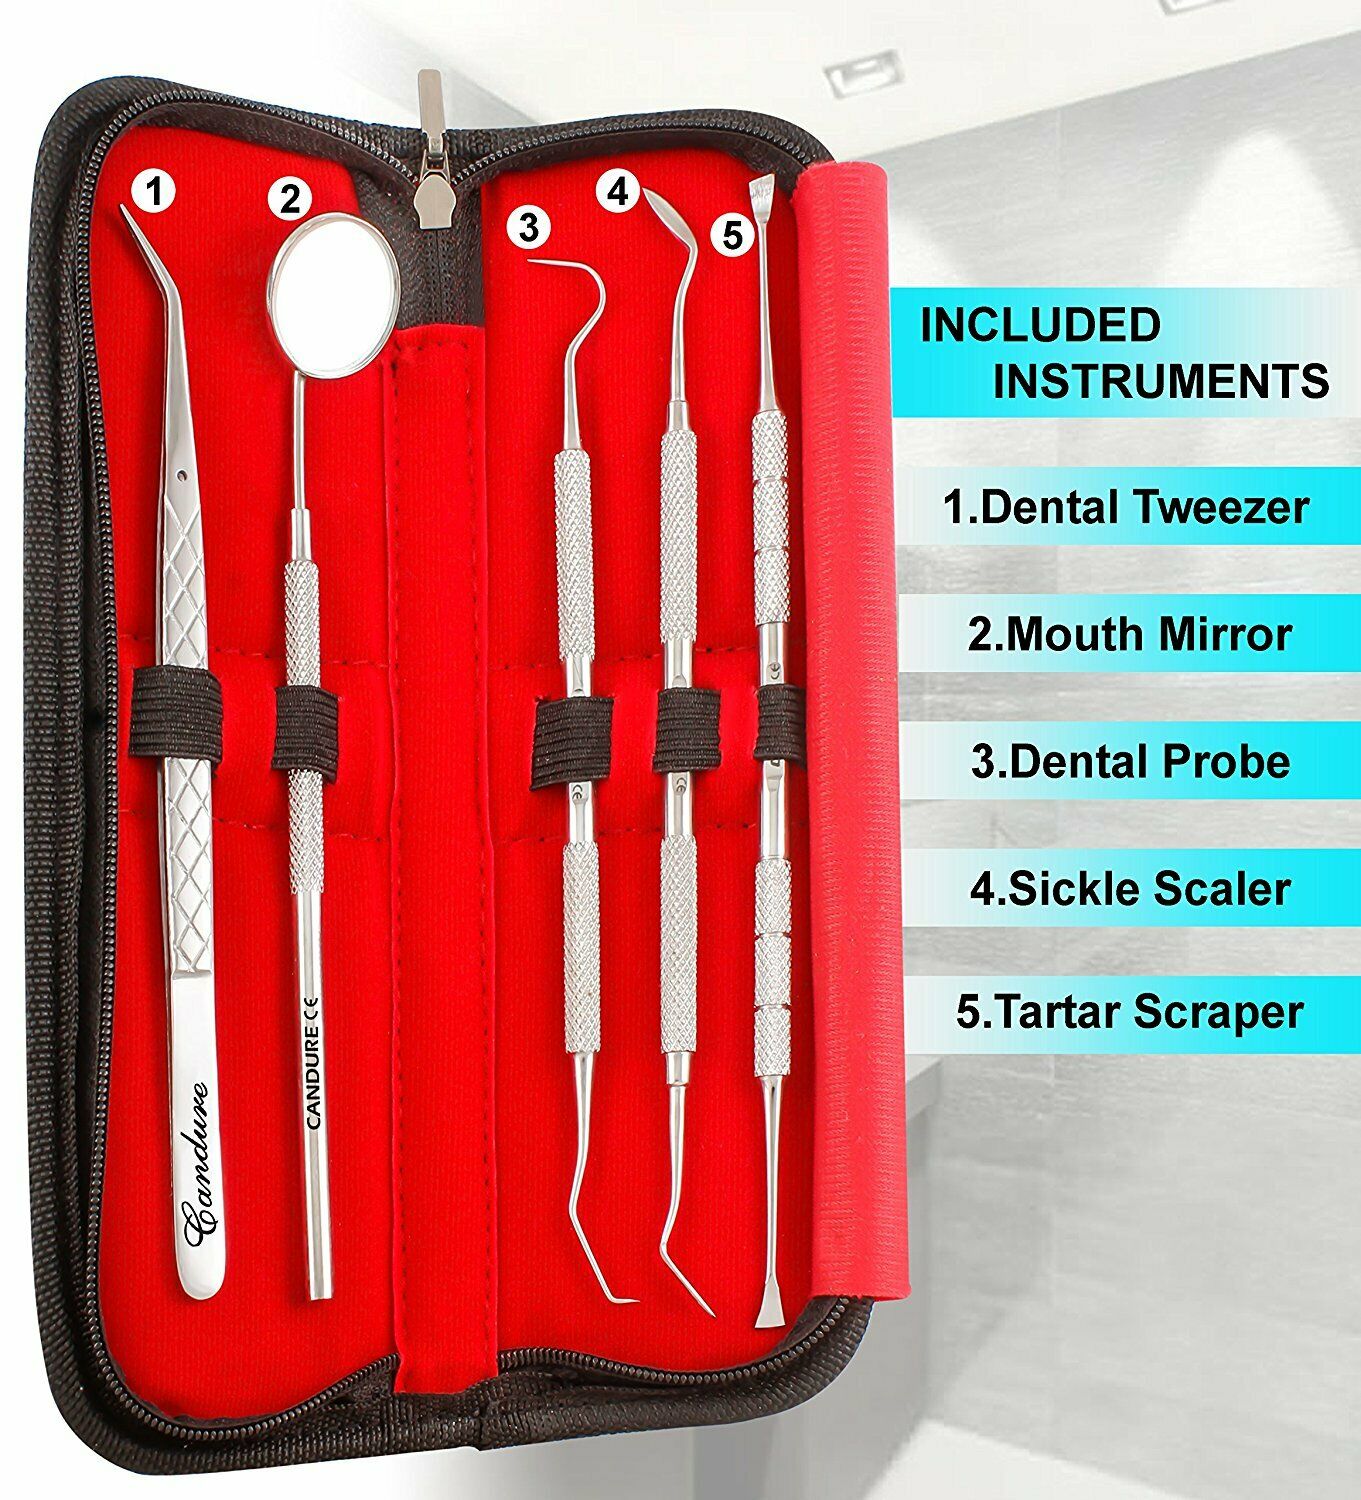 6pcs Dental Tooth Cleaning Kit Dentist Scraper Pick Tool Calculus Plaque Flos Remover